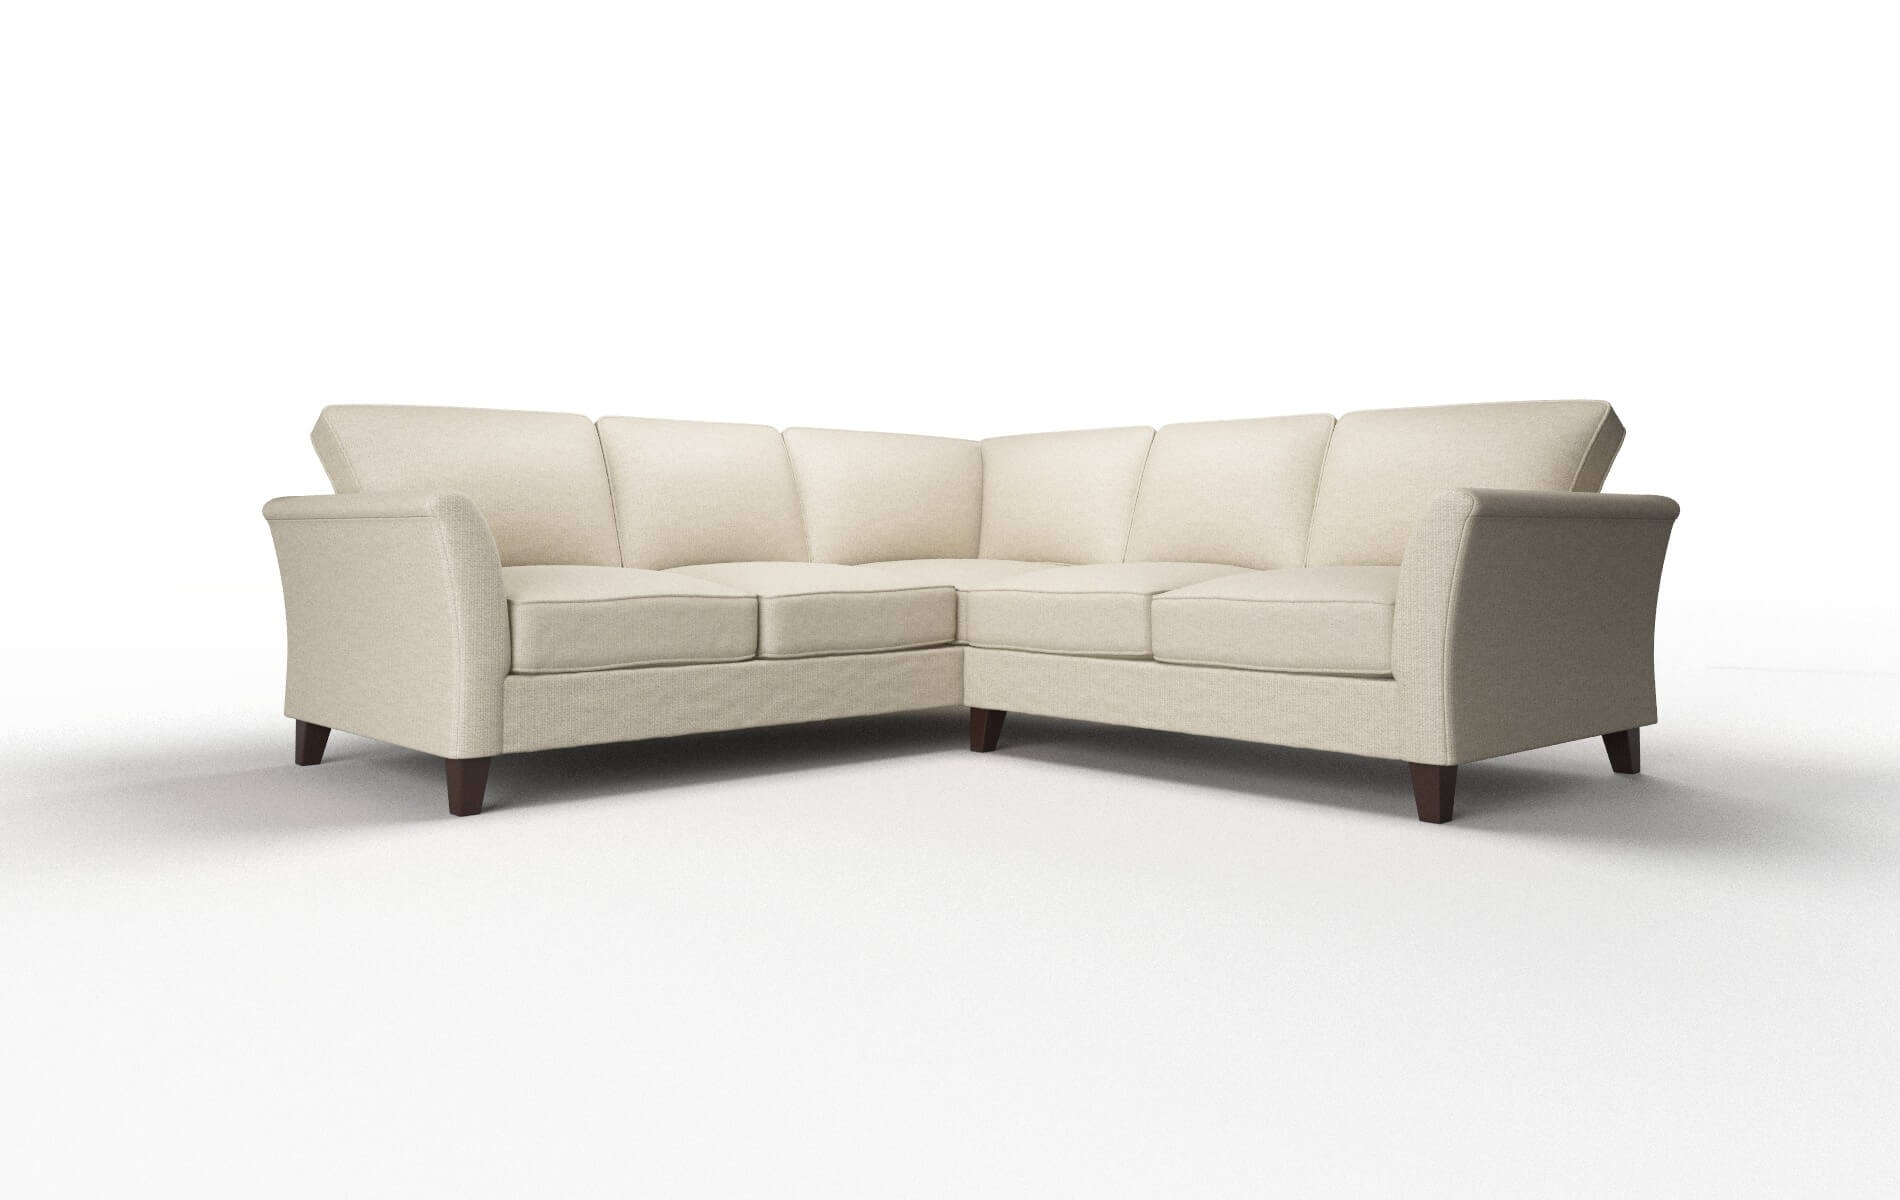 Cologne Insight Barley Sectional espresso legs 1